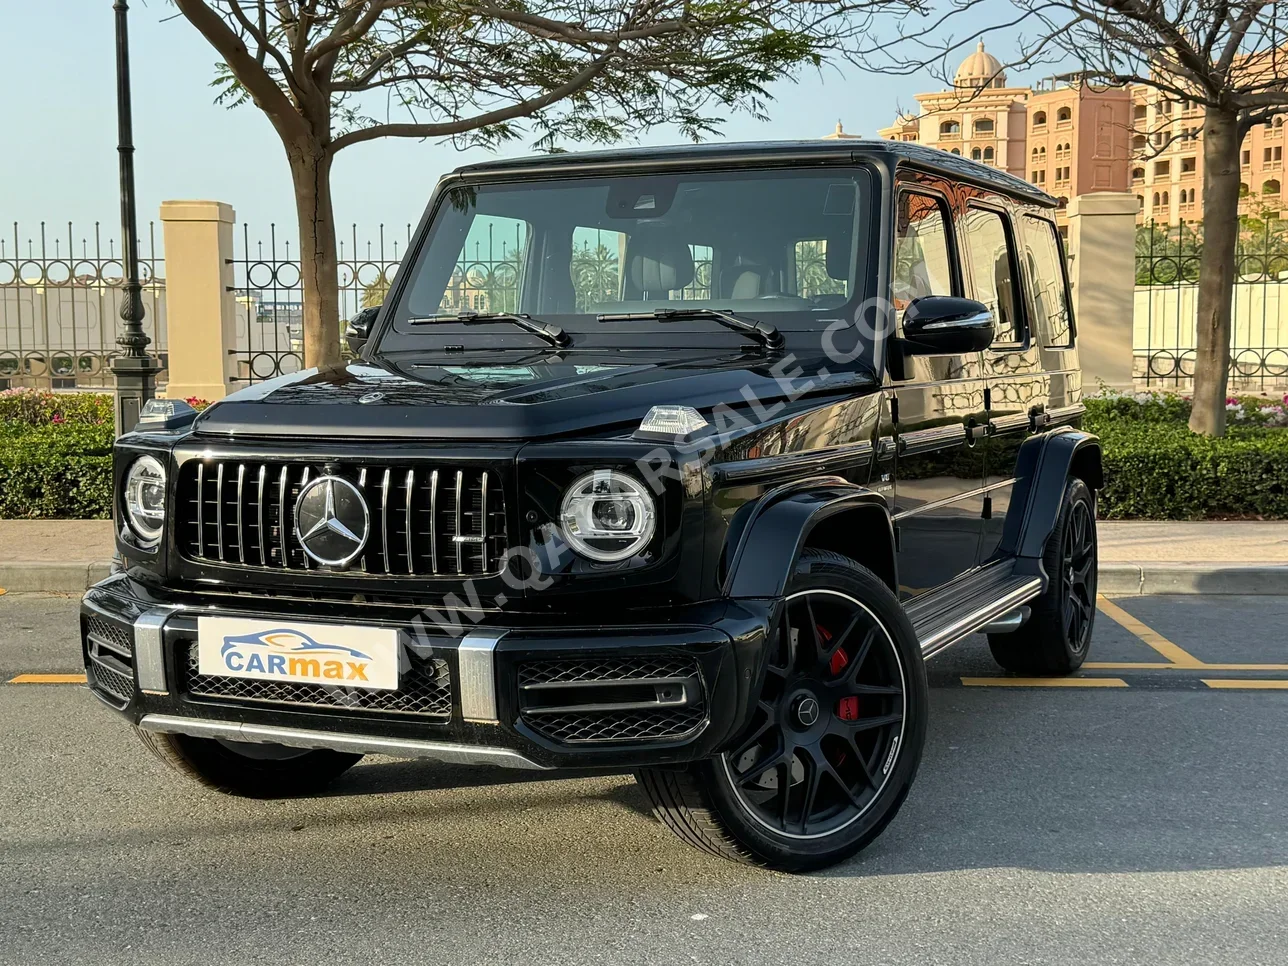 Mercedes-Benz  G-Class  63 AMG  2019  Automatic  22,000 Km  8 Cylinder  Four Wheel Drive (4WD)  SUV  Black  With Warranty